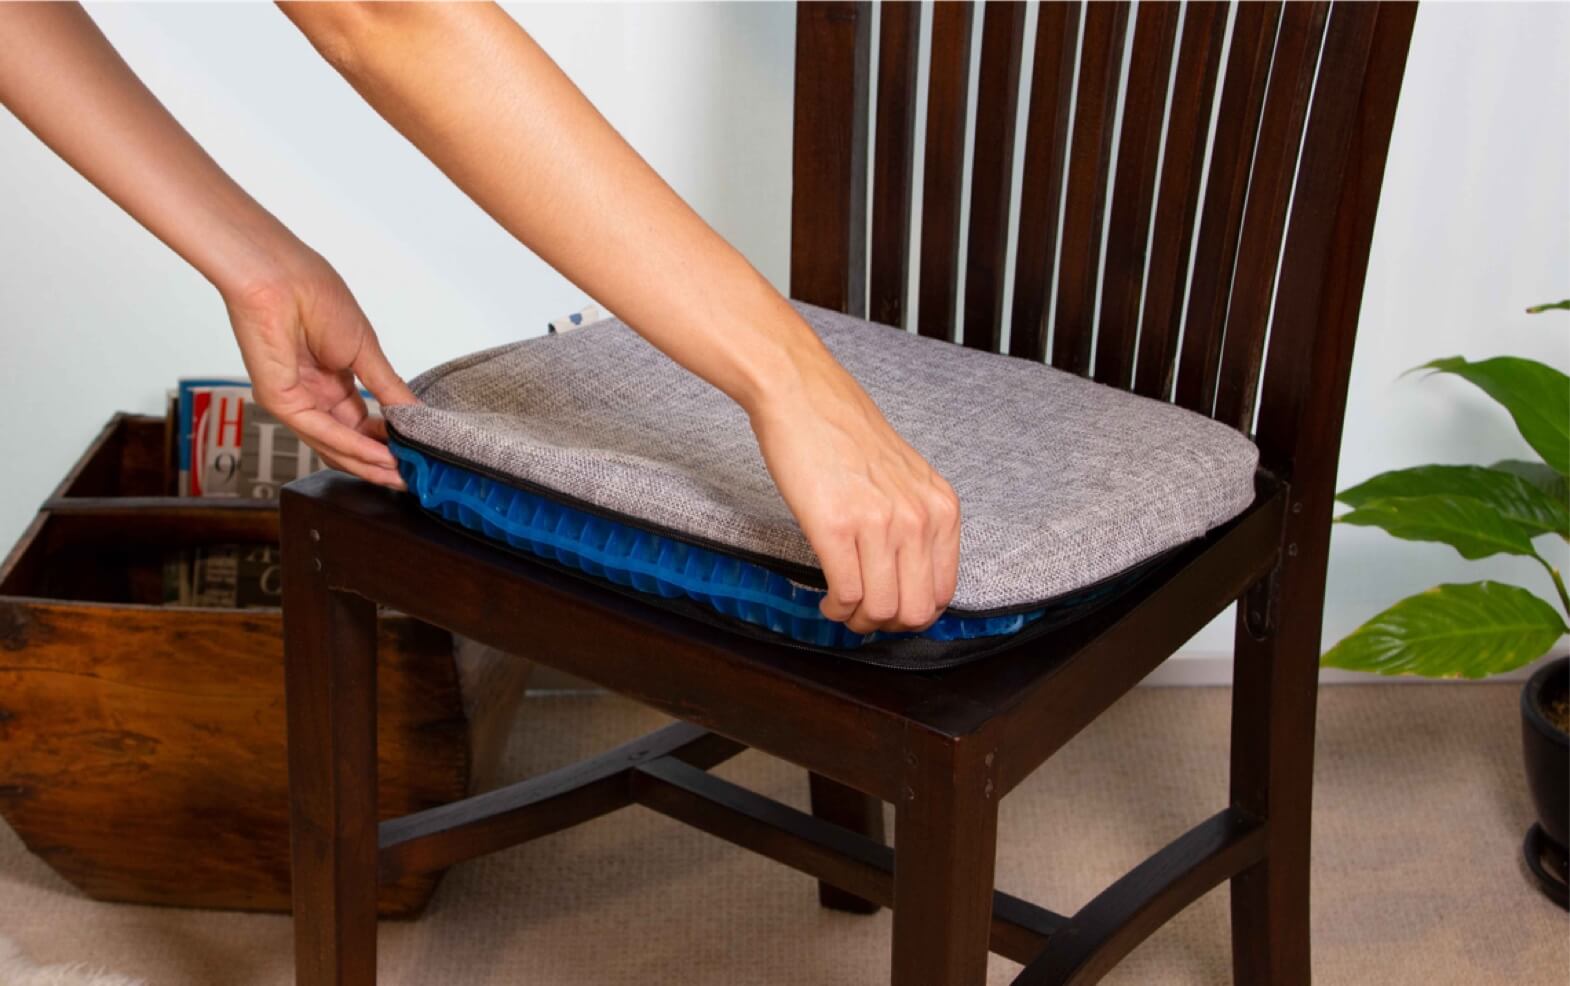 Remedic Gel Seat Cushion with Incontinence Pad
